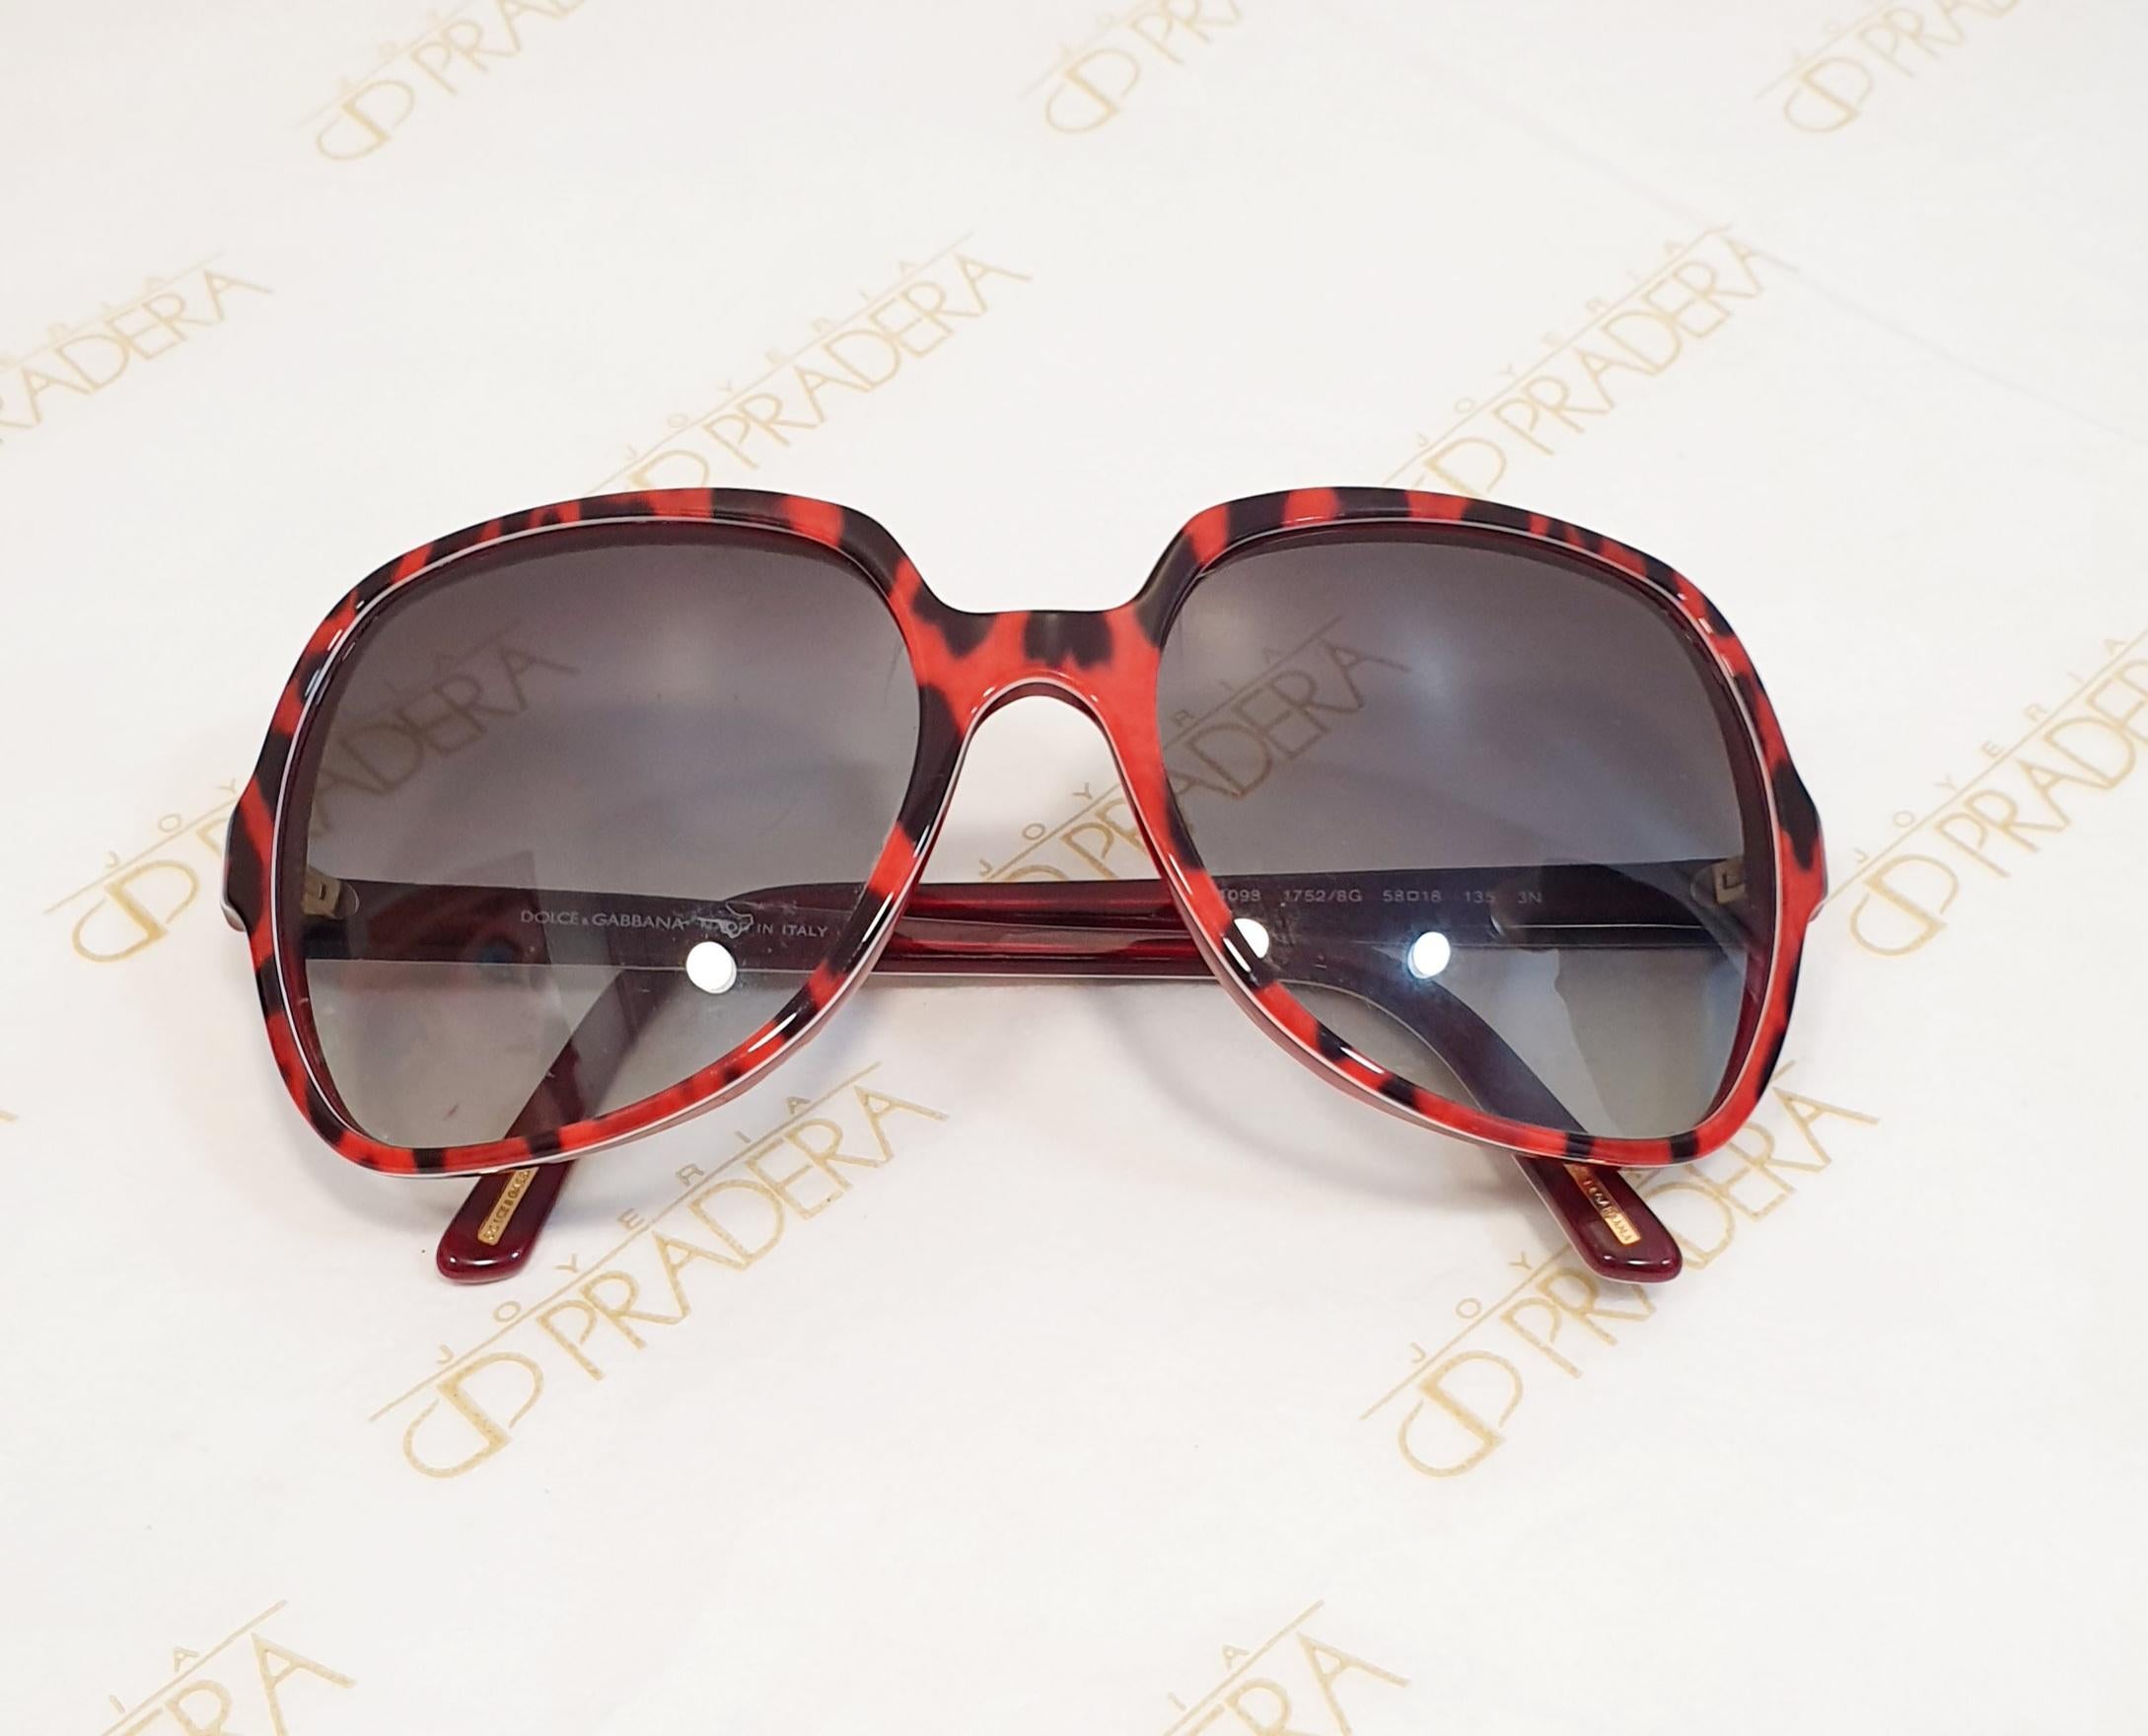  DOLCE & GABBANA DG 4098 1752/8G Red Blue Aunthentic Sunglasses 58-18
Vintage luxury oversized Dolce Gabbana sunglasses for women
Made Italy
Lens Size:  5,71cm 2.25inches x 5,71cm  2'25inches

.




READY TO SHIP
*Shipment of this piece is not